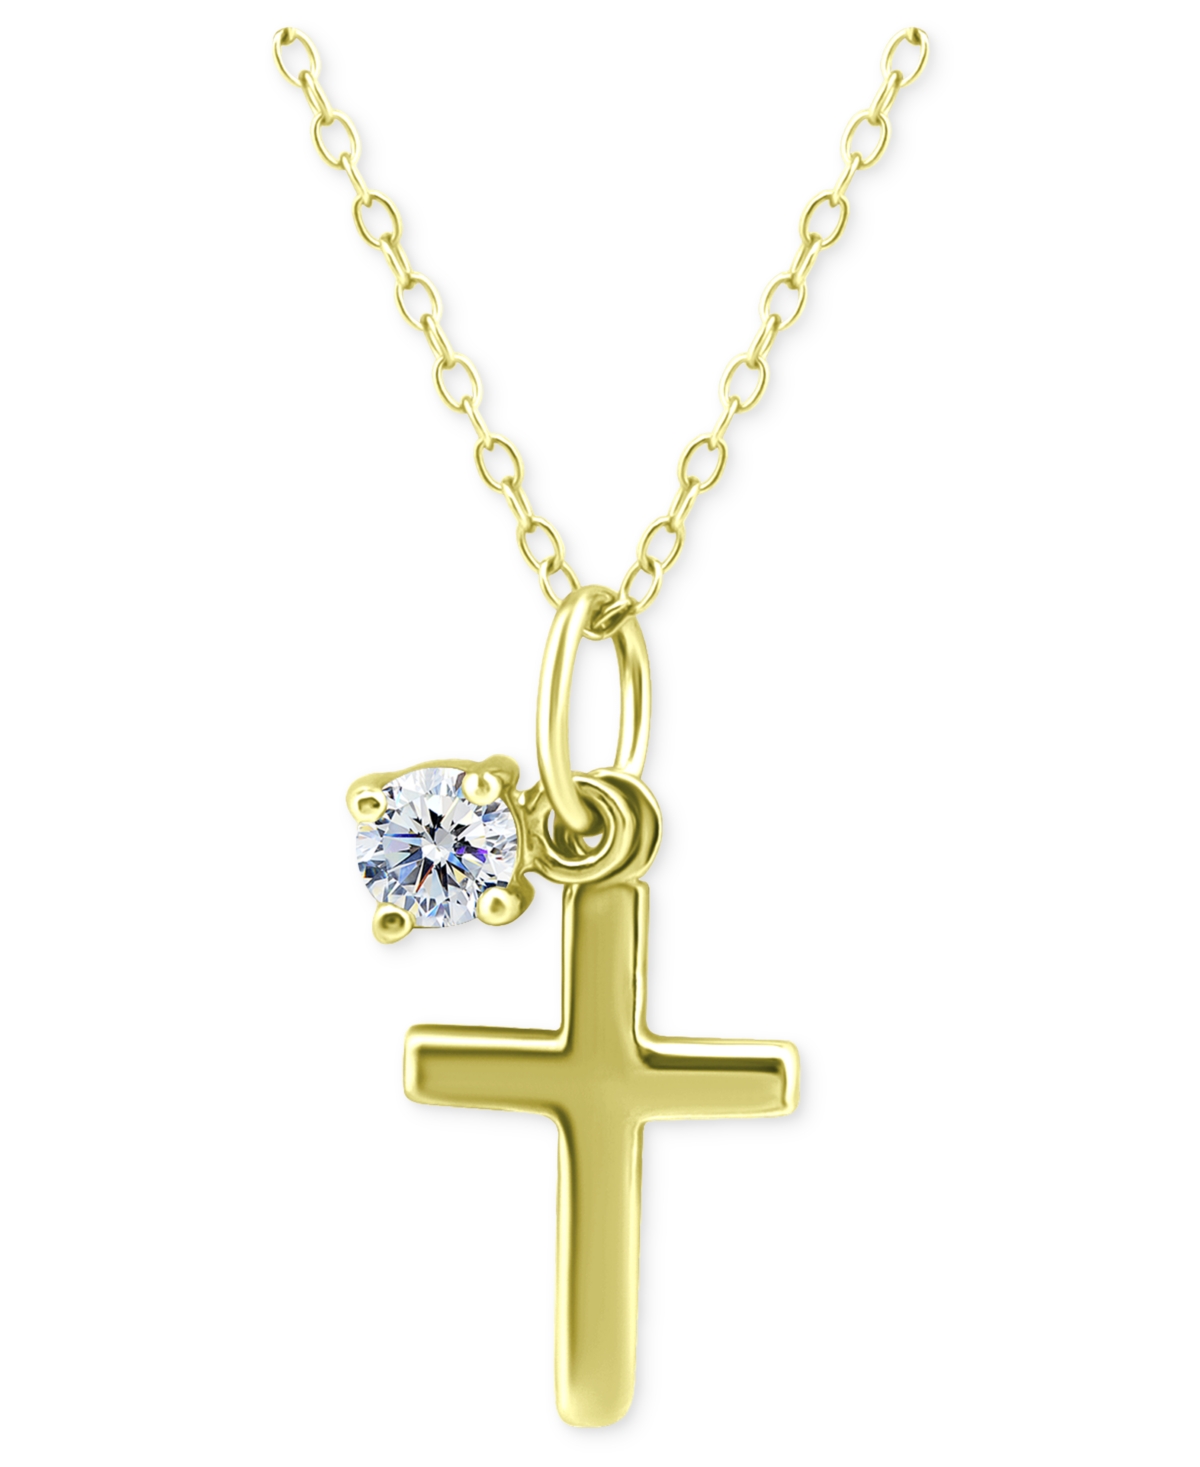 Giani Bernini Cubic Zirconia Solitaire & Polished Cross Pendant Necklace In 18k Gold-plated Sterling Silver, Creat In Gold Over Silver